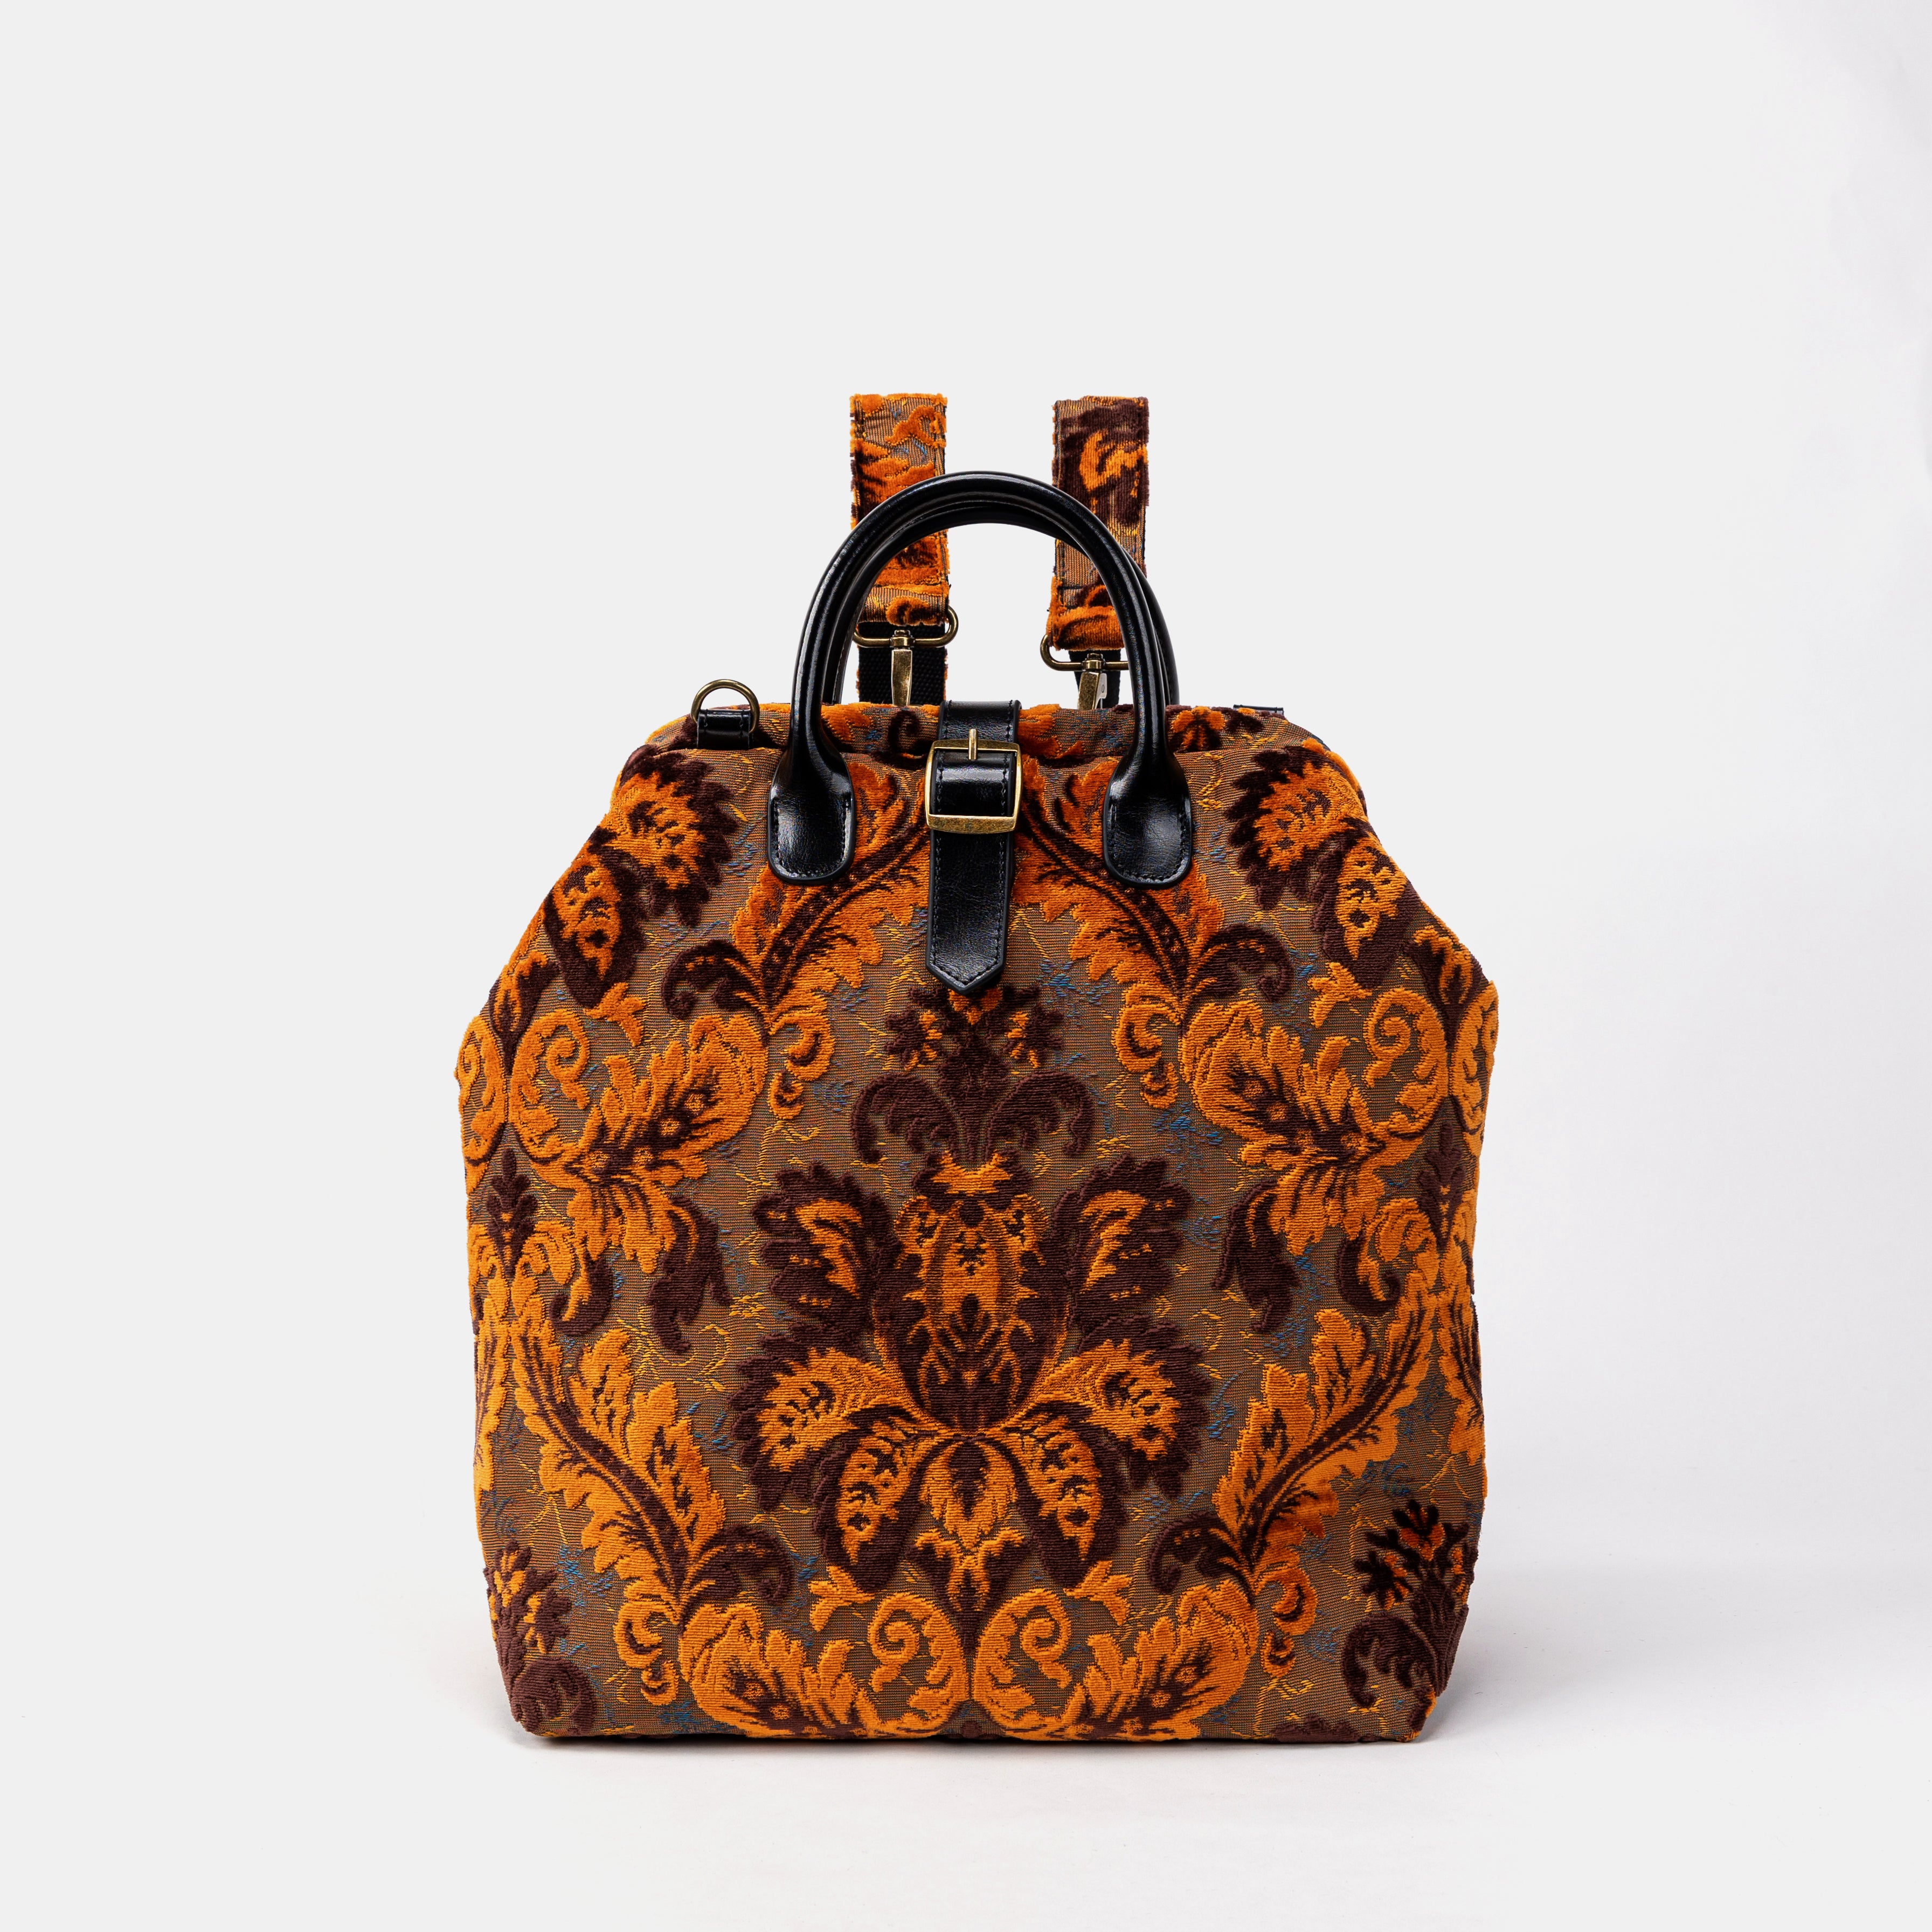 Revival Sienna Carpet Laptop Backpack Mary Poppins Bag front